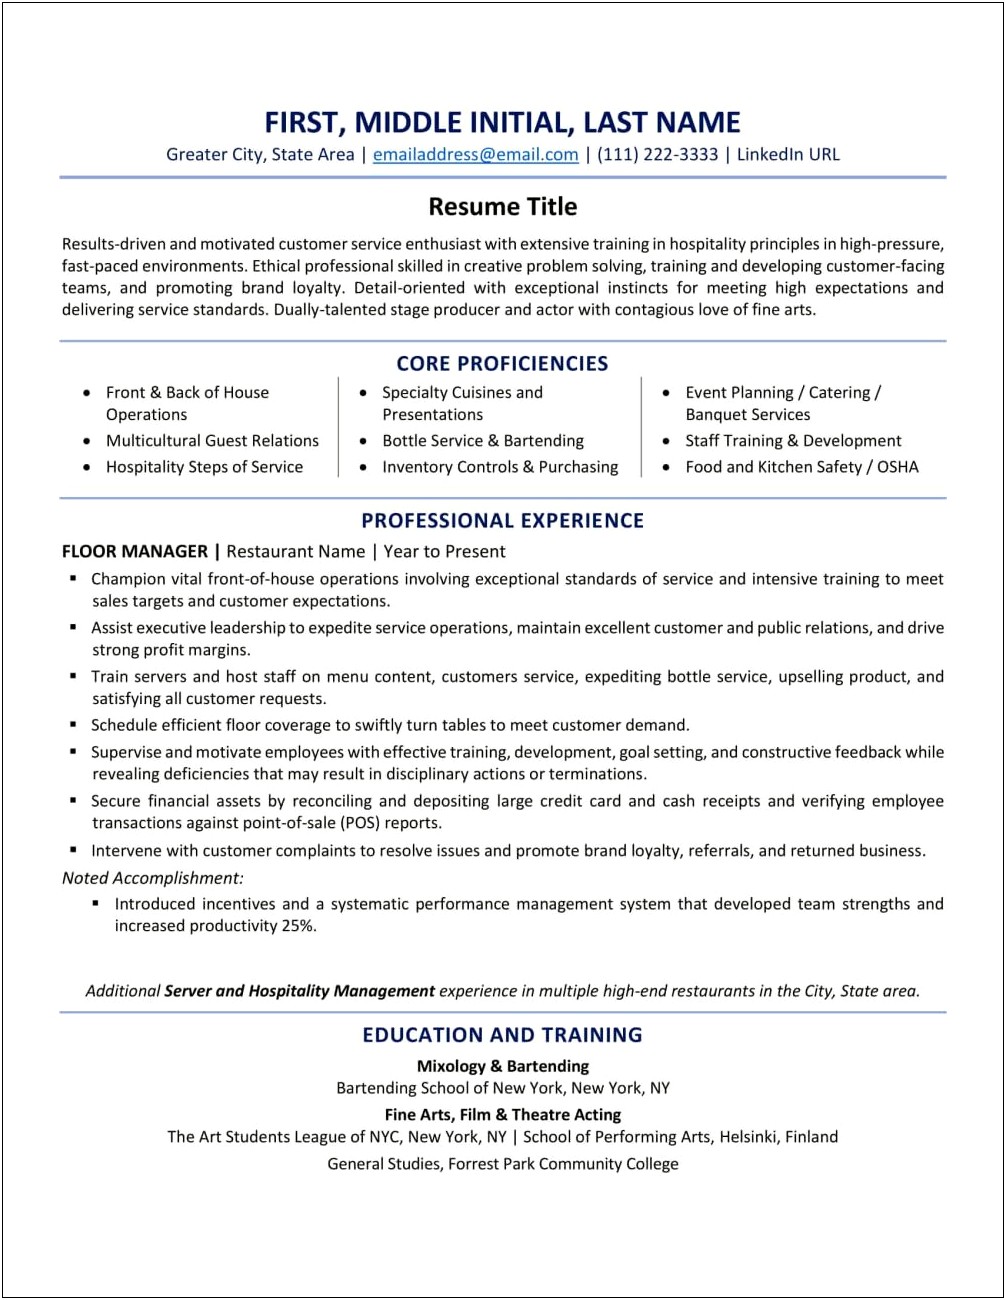 Two Different Jobs Same Company Resume